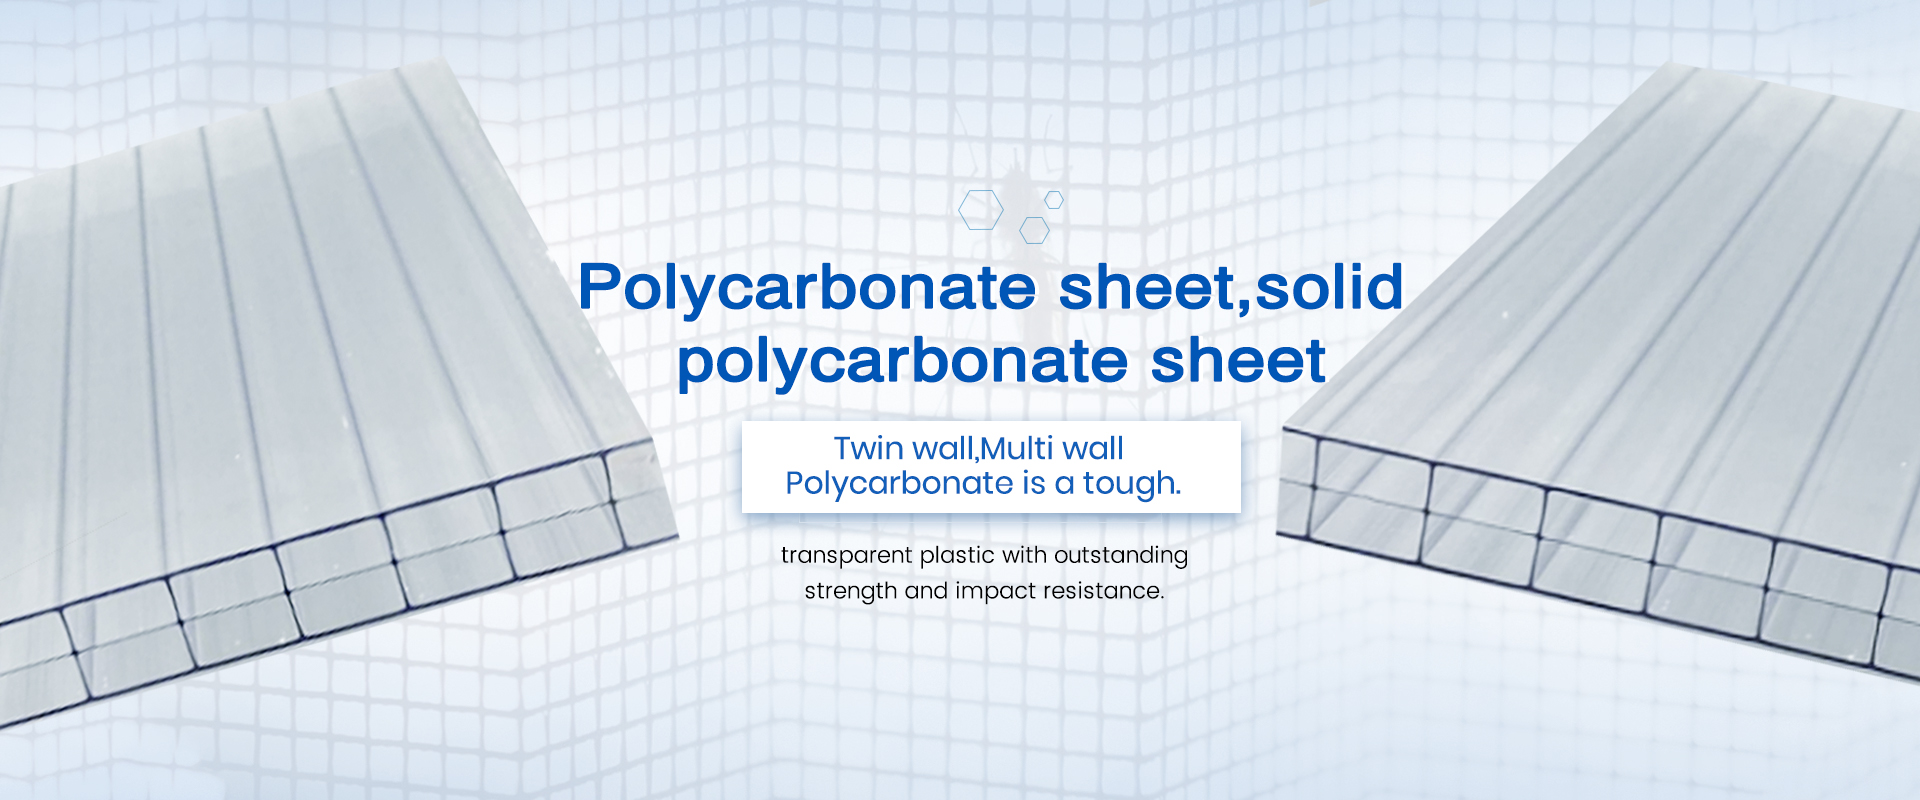 Polycarbonate sheet, solid polycarbonate sheet